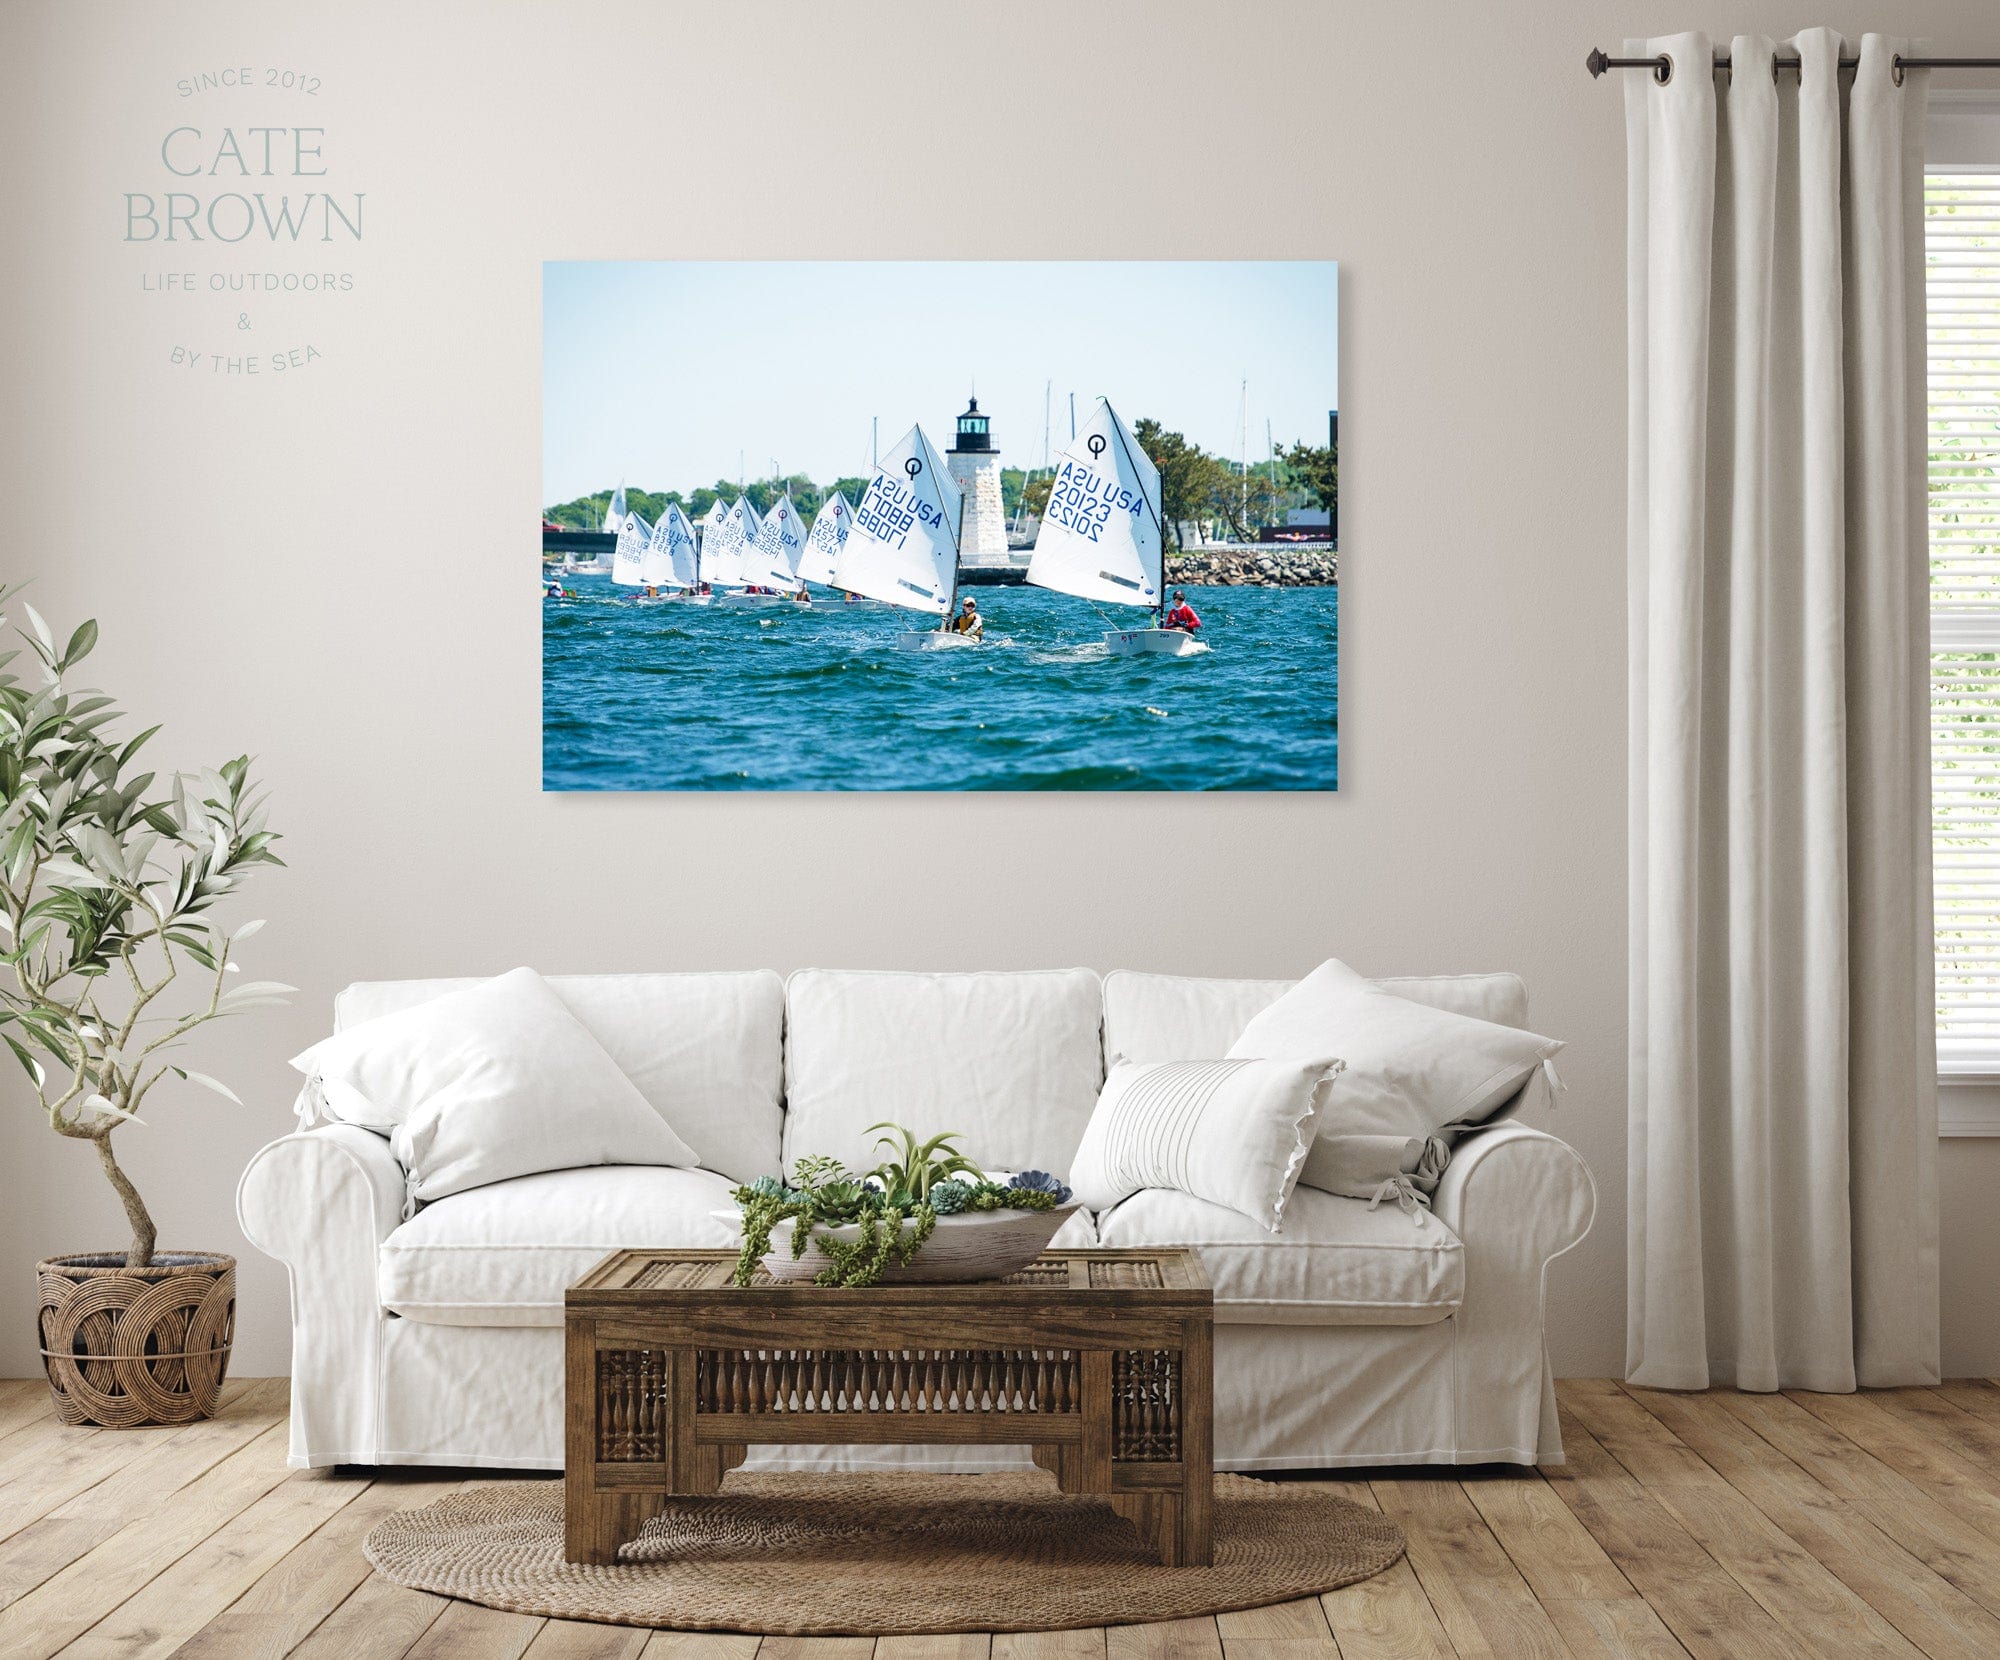 Cate Brown Photo Canvas / 16"x24" / None (Print Only) Optis at Goat Island  //  Nautical Photography Made to Order Ocean Fine Art